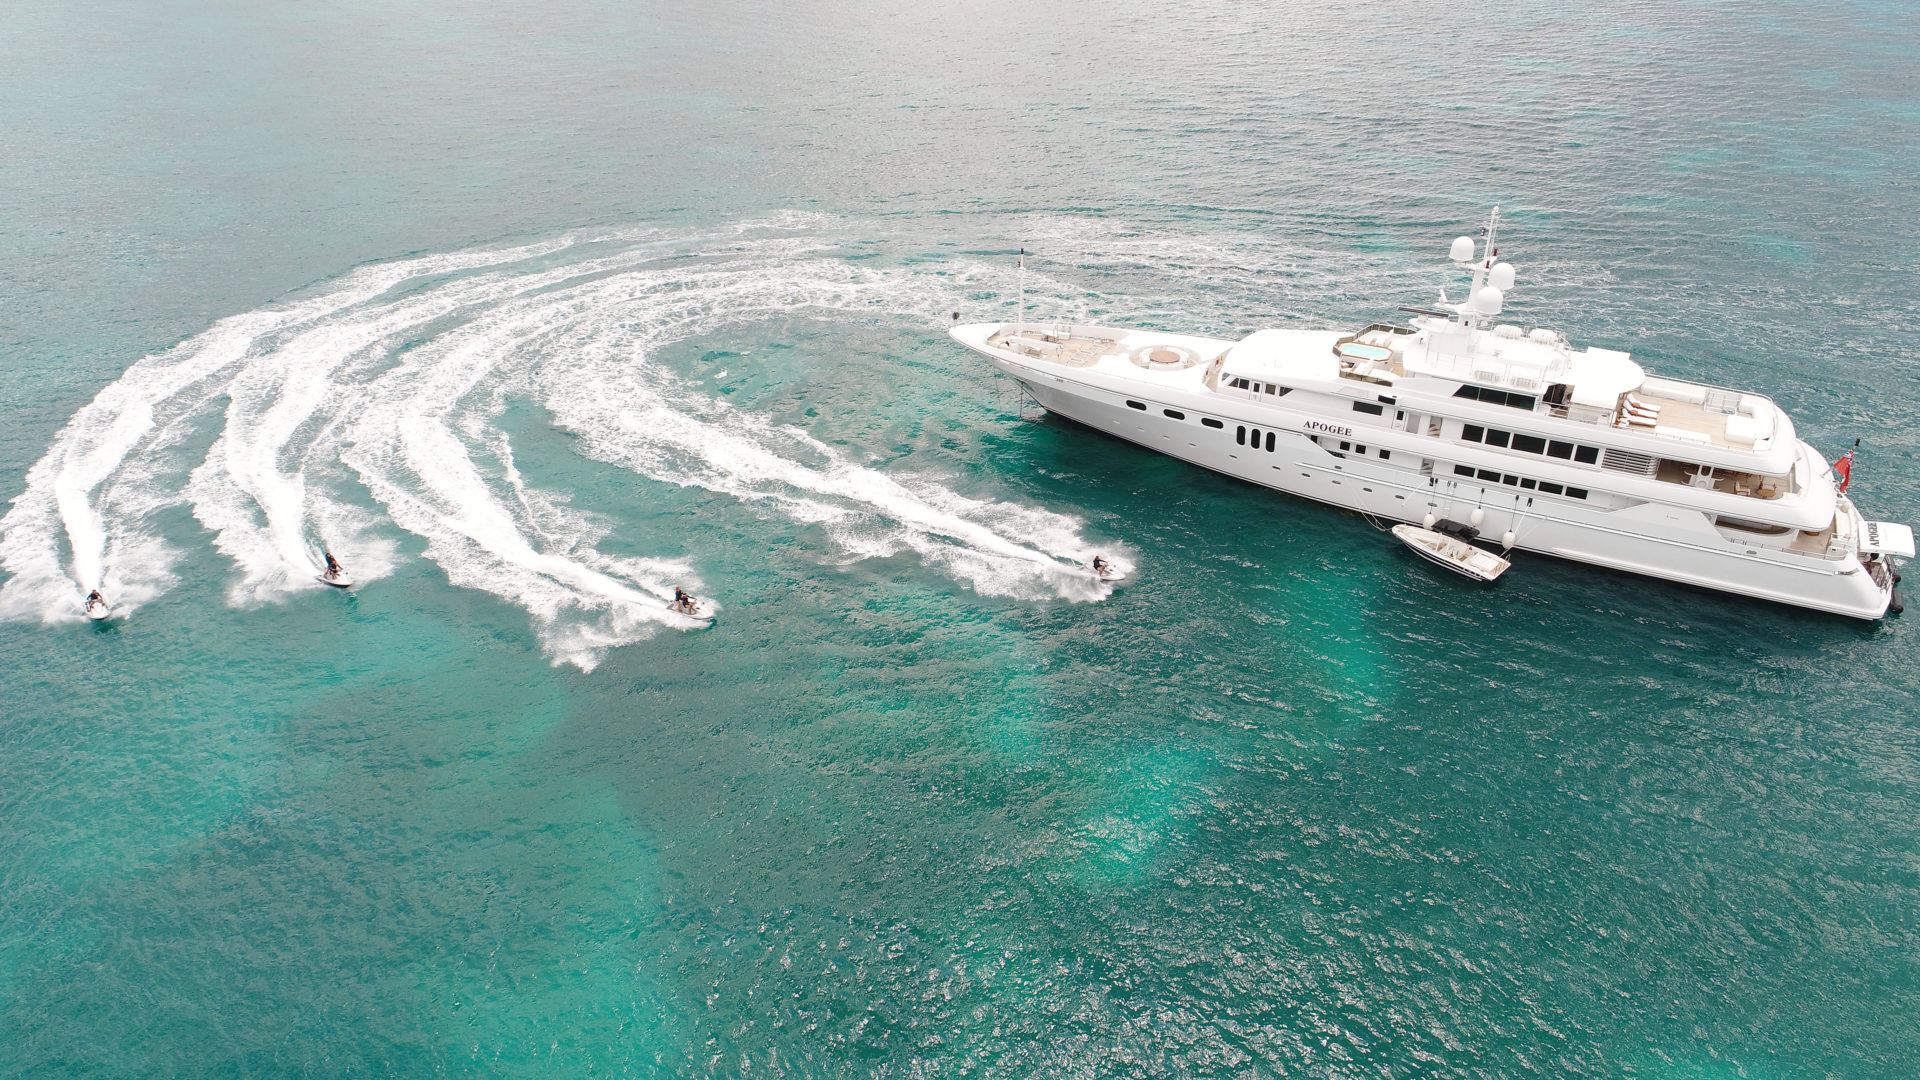 The superyacht offices for business on board